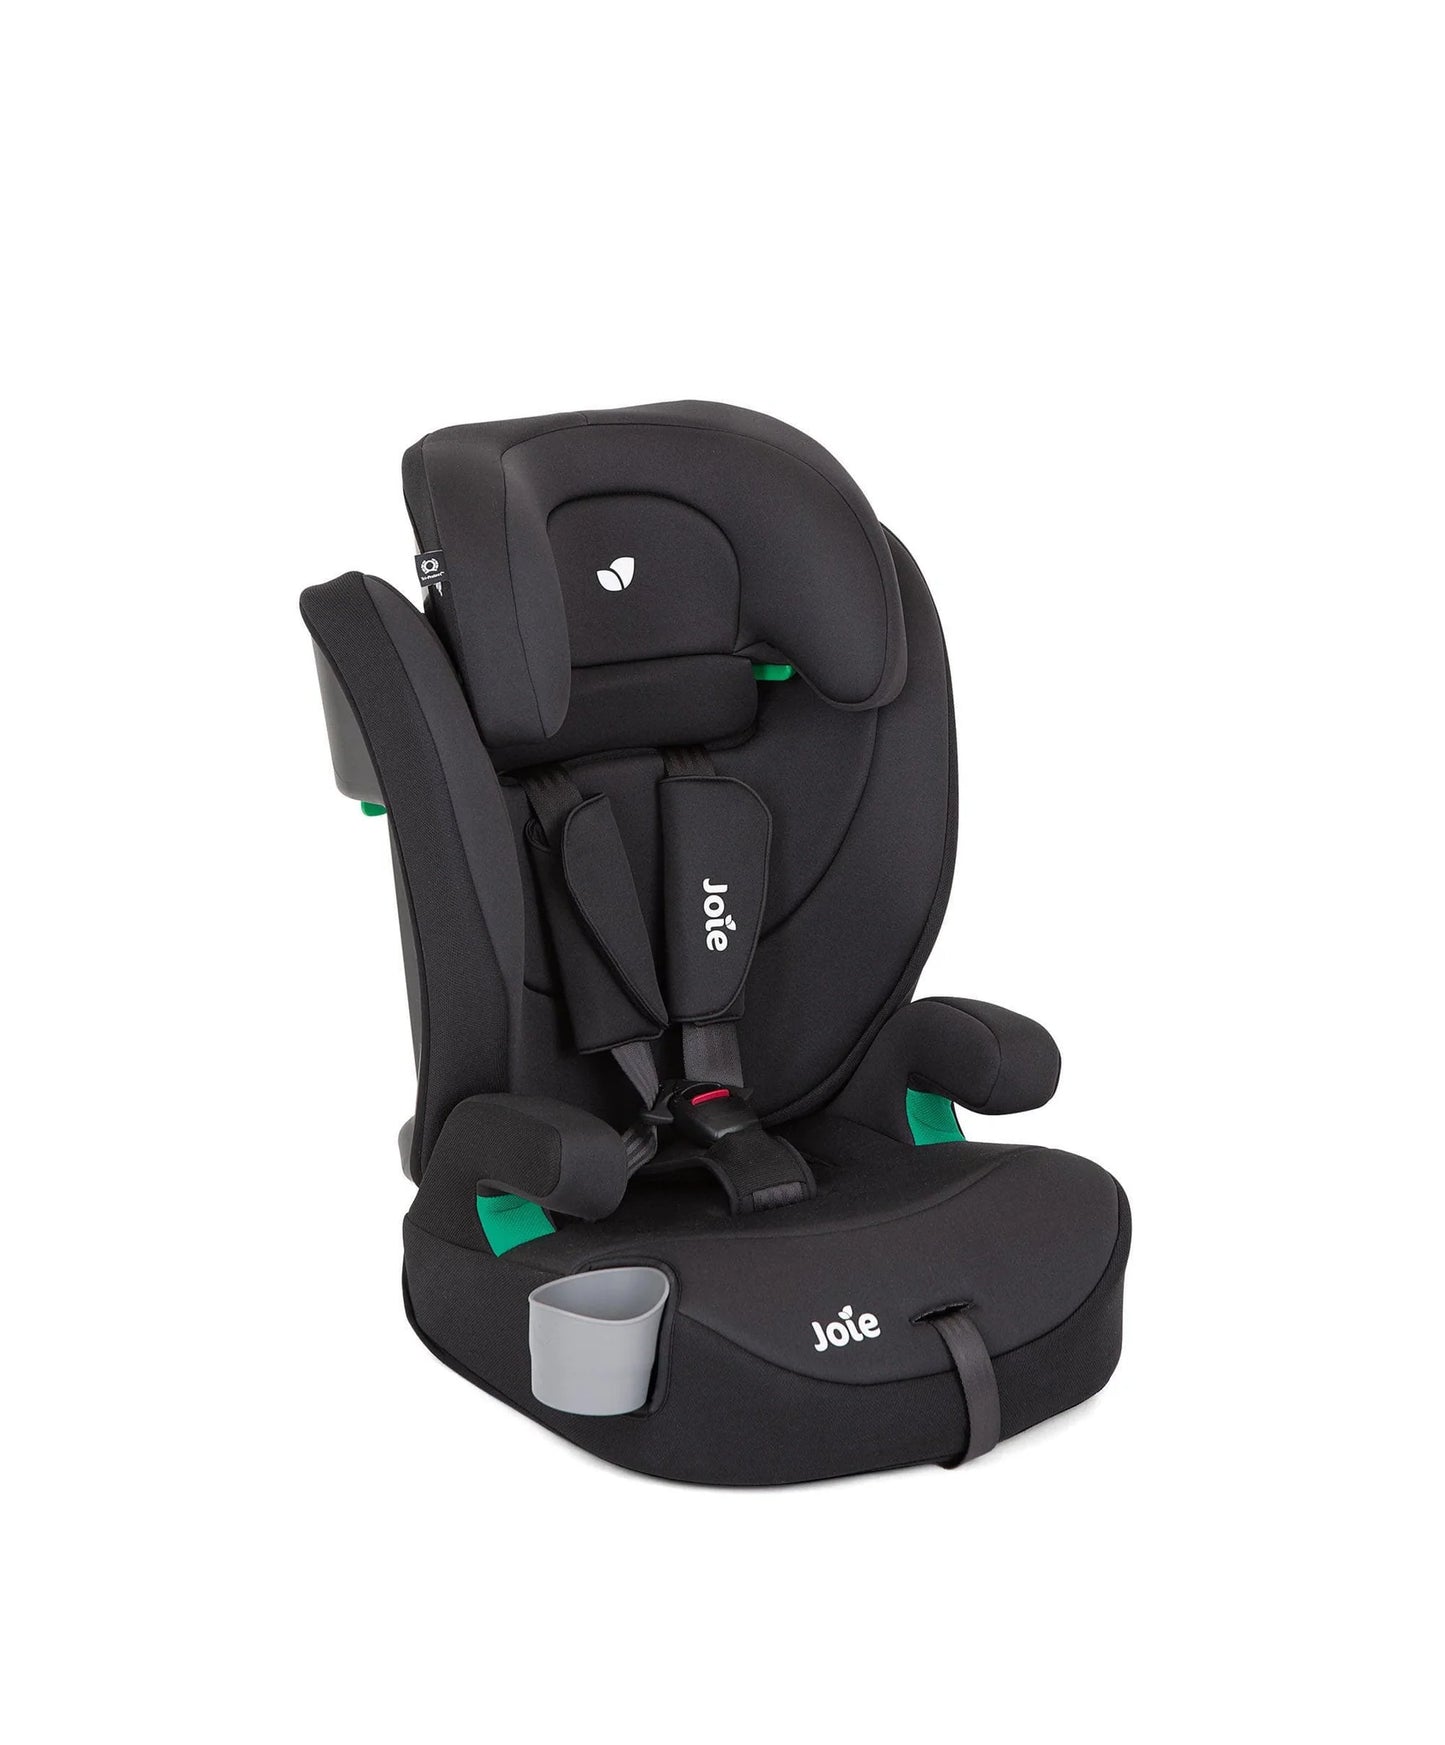 Joie Elevate R129 Car Seat